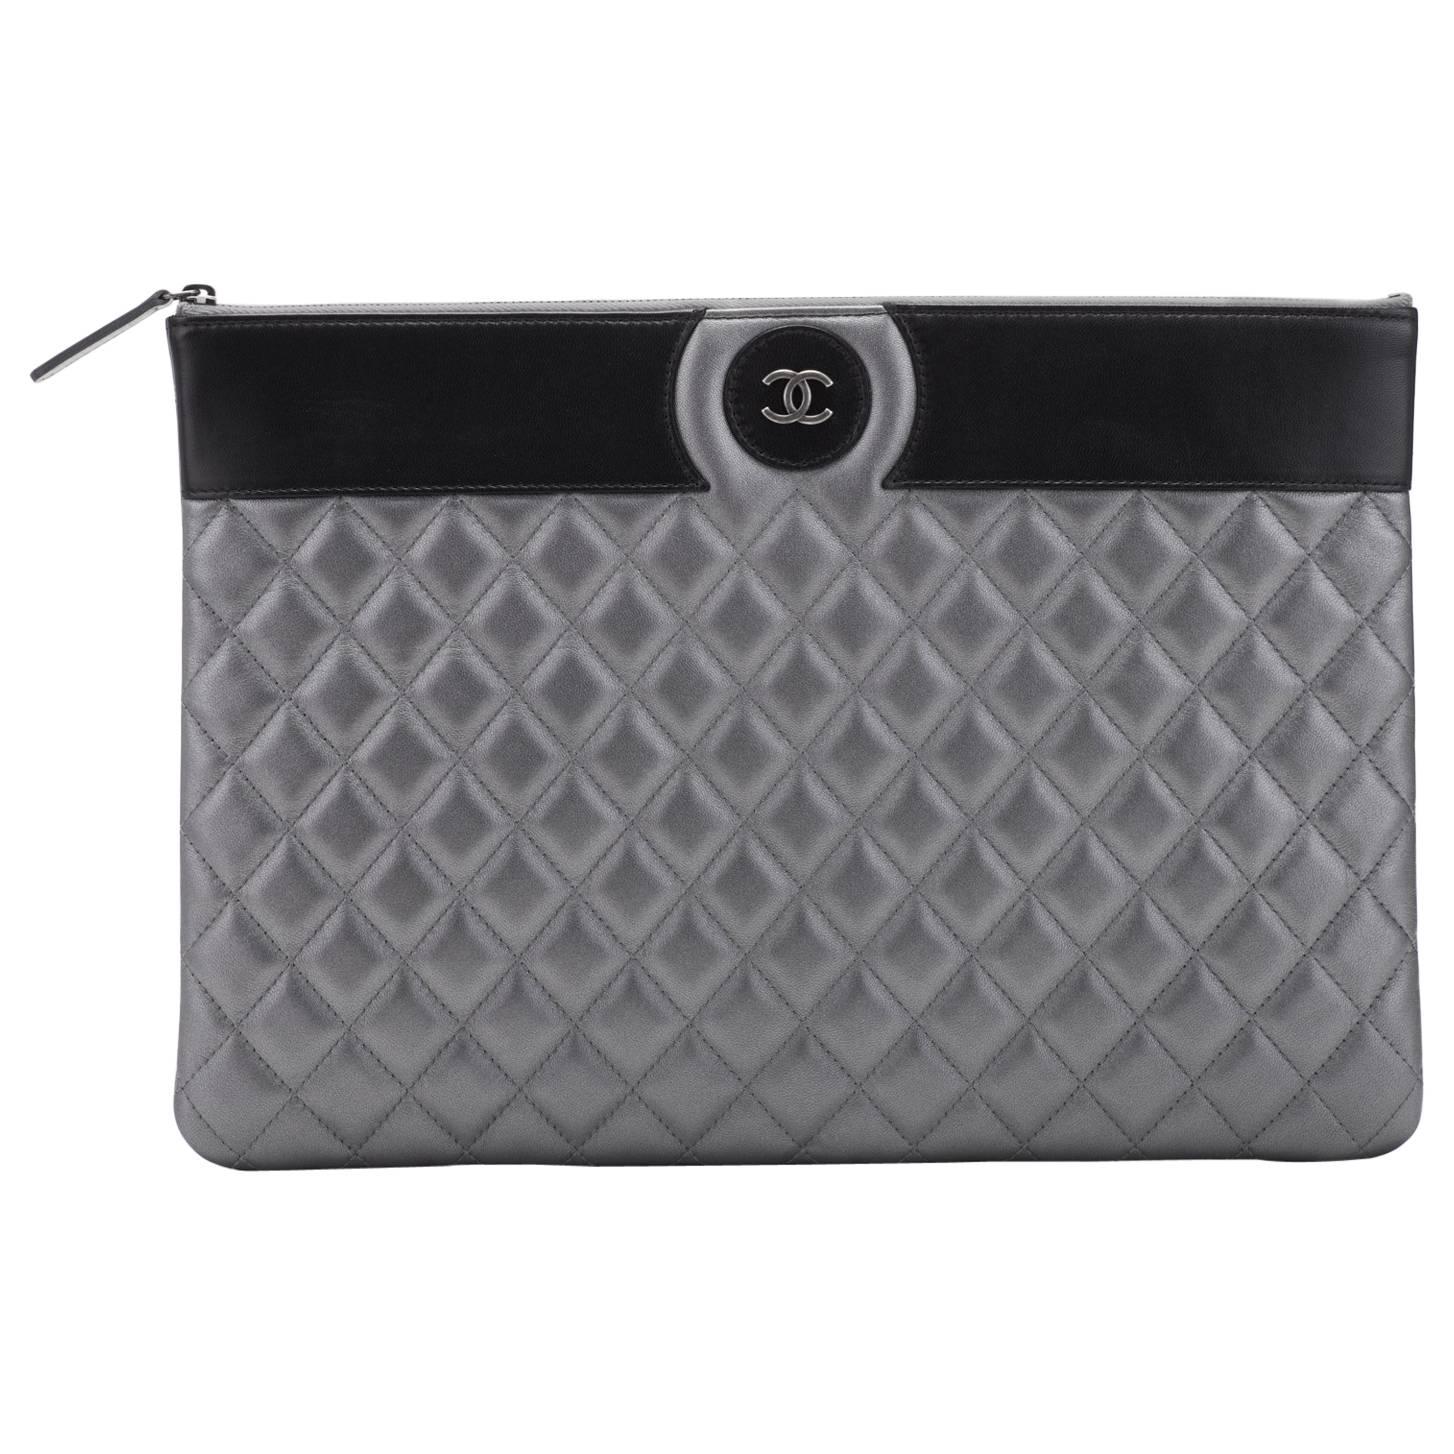 New Chanel Large Pewter Black Clutch